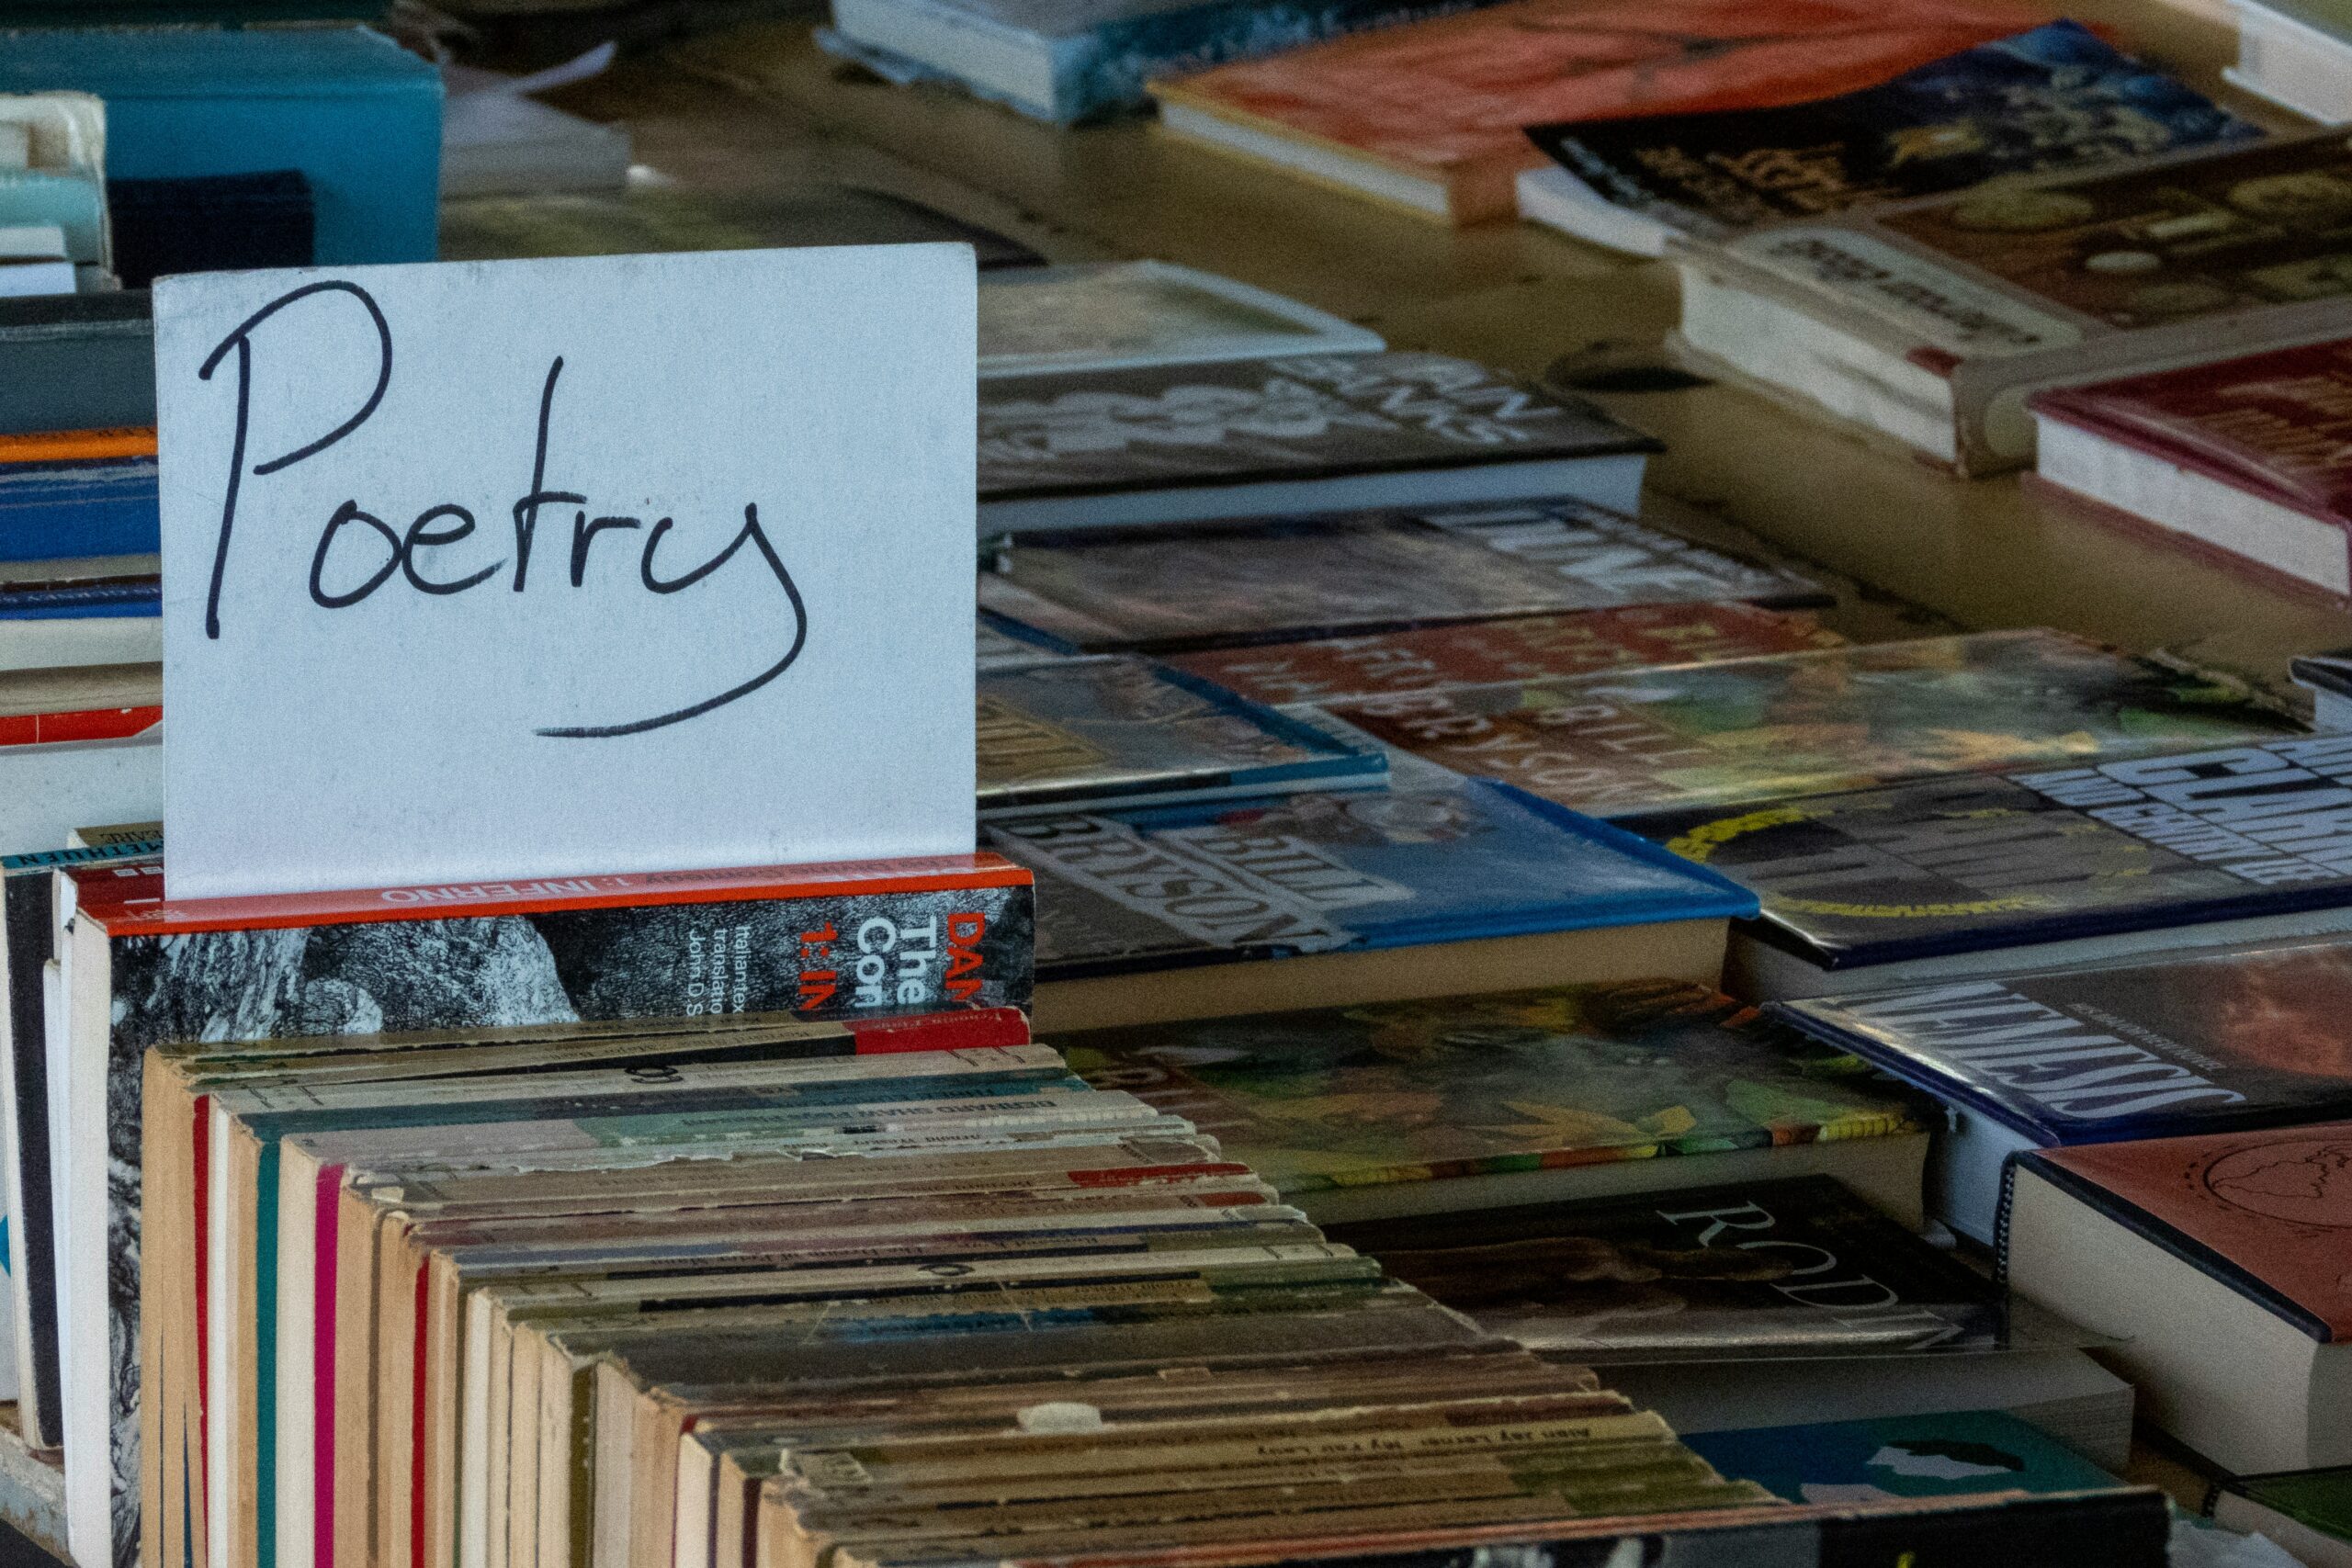 A "poetry" sign stands out on a table filled with a variety of books.